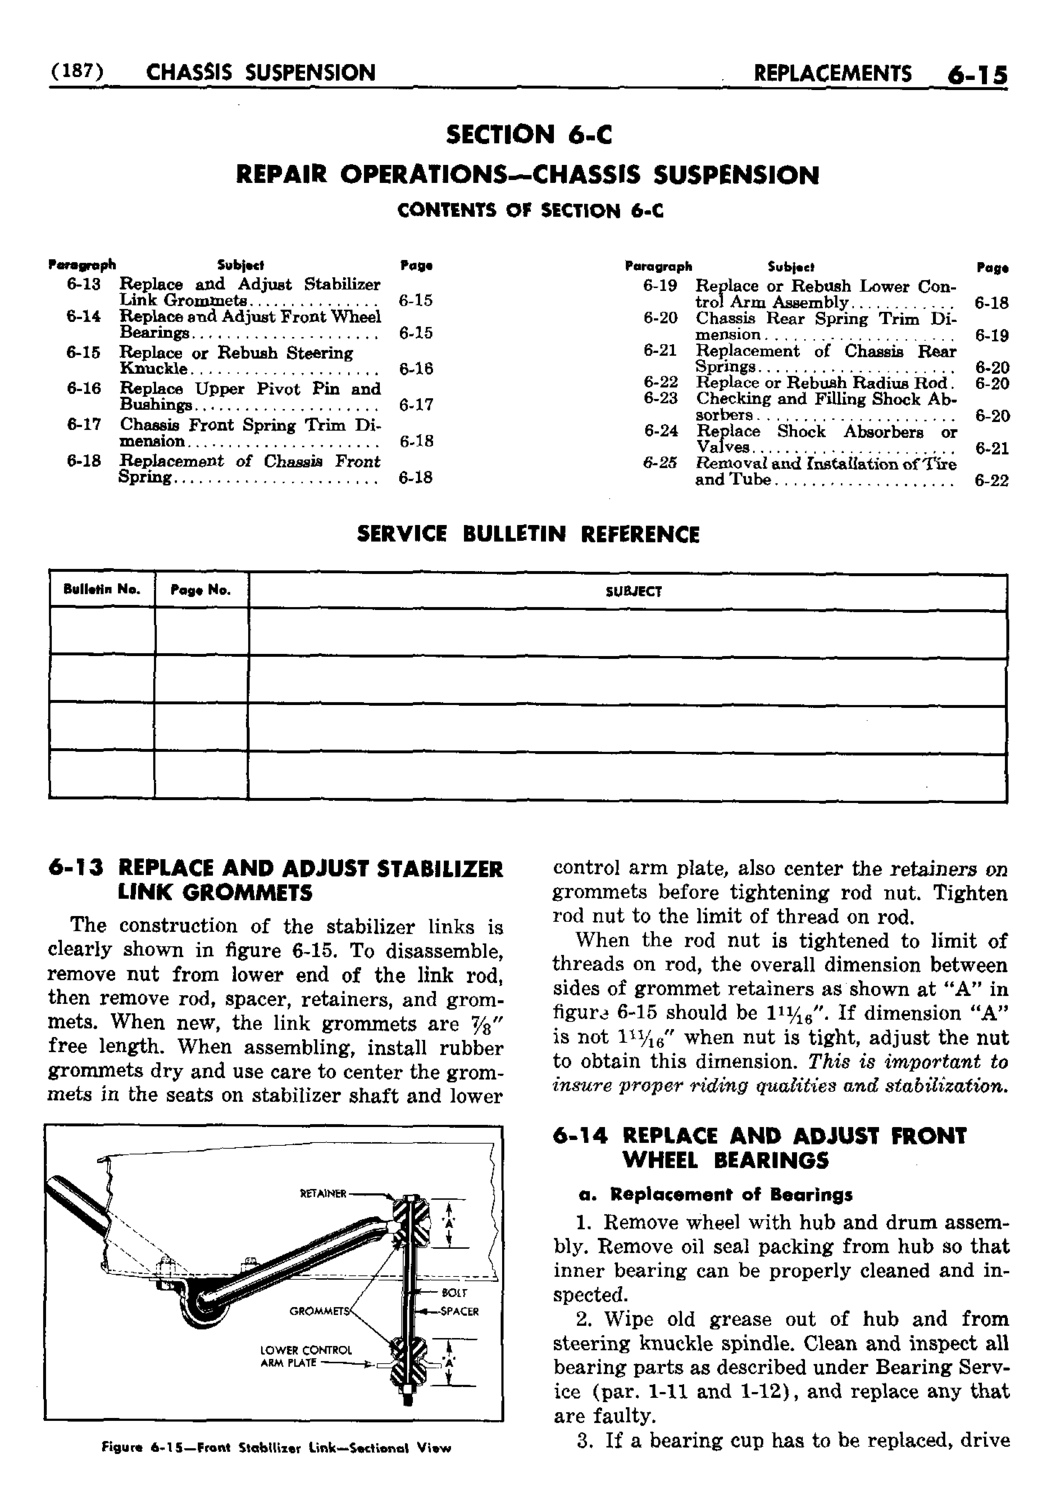 n_07 1950 Buick Shop Manual - Chassis Suspension-015-015.jpg